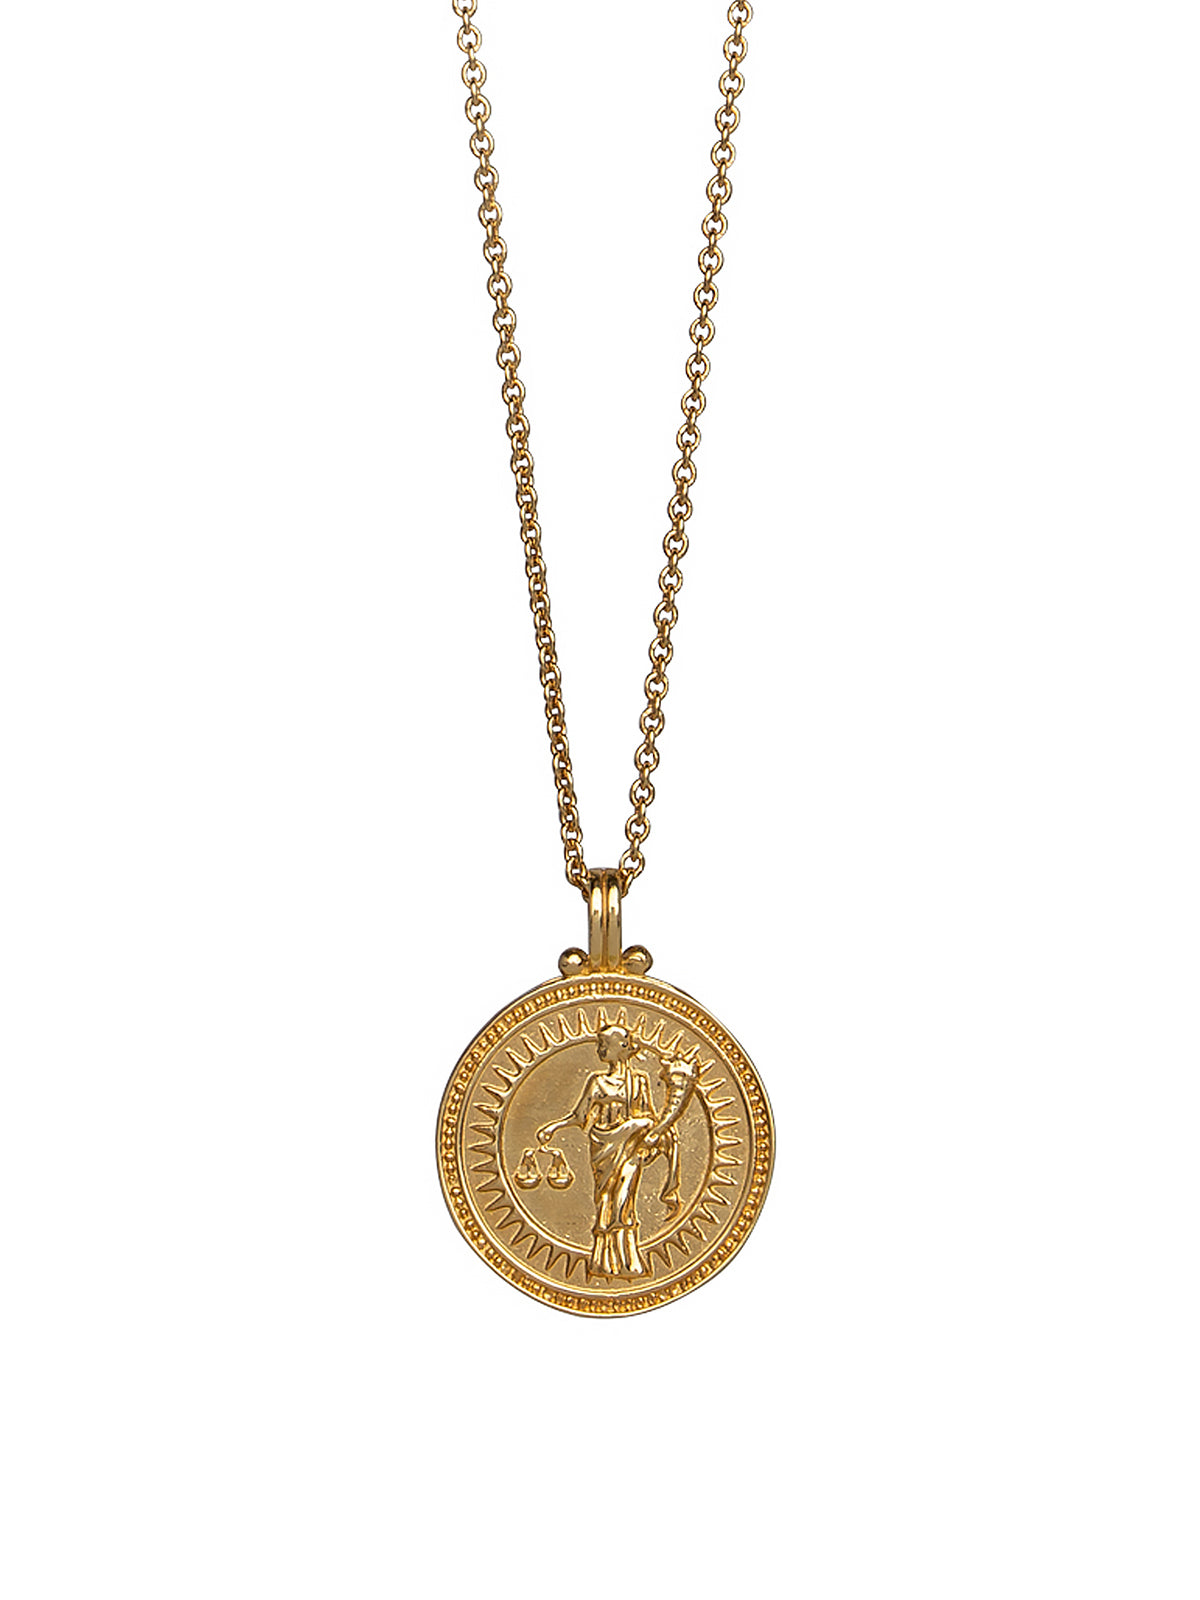 Libra. 18ct Solid Gold Star Sign Necklace. The pendant features an Evil Eye on the back to ward off any naughty behavior aimed at you, Our logo and the 750 Hallmark for 18ct Gold.